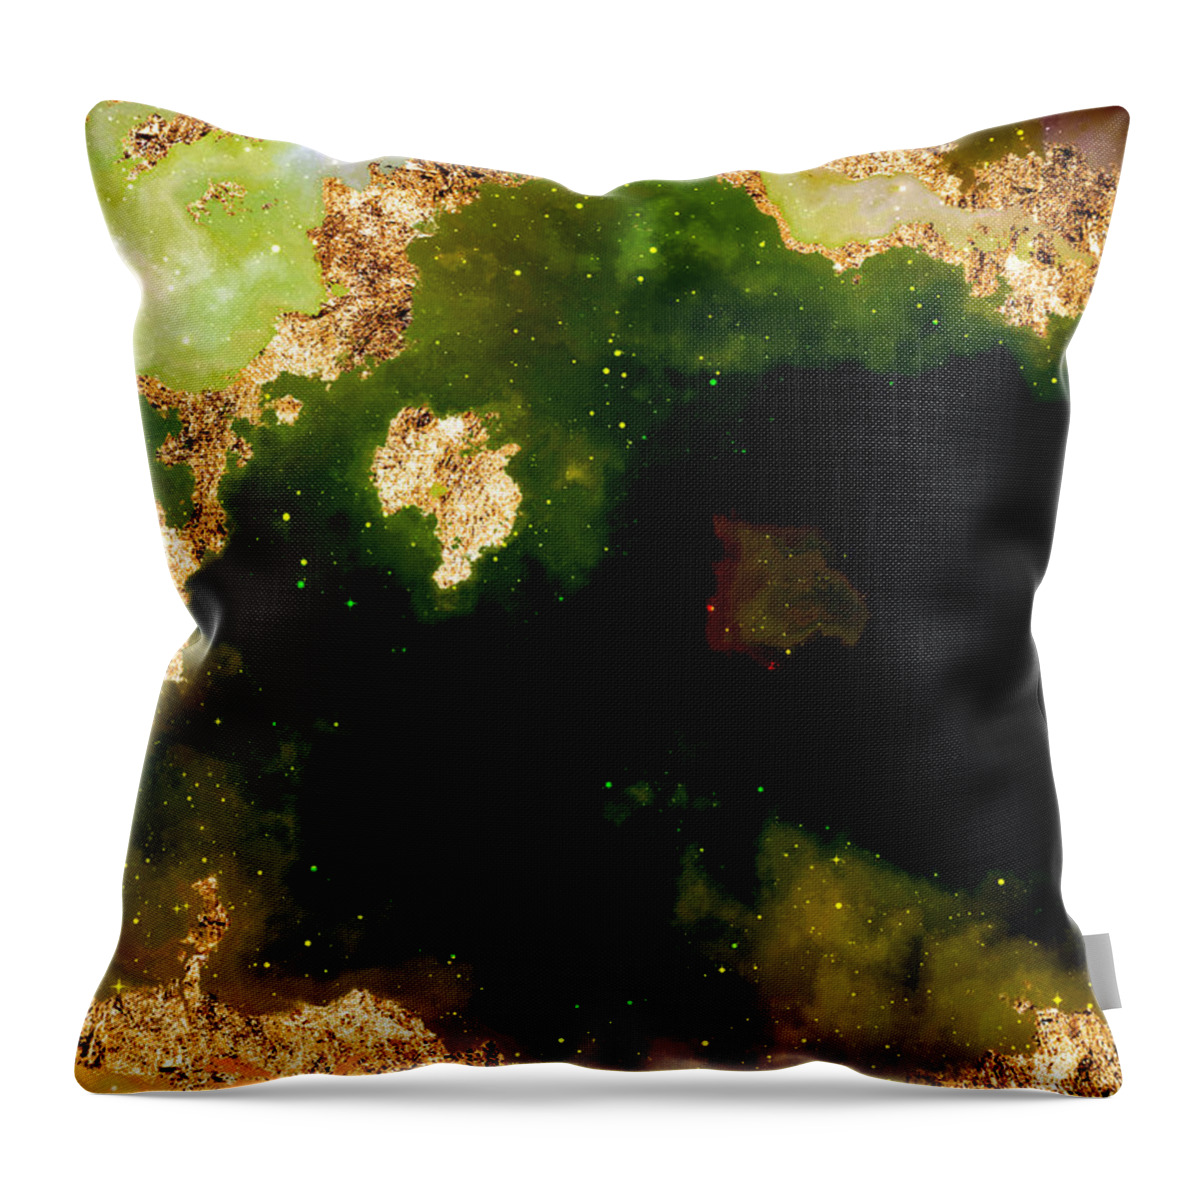 Holyrockarts Throw Pillow featuring the mixed media 100 Starry Nebulas in Space Abstract Digital Painting 013 by Holy Rock Design